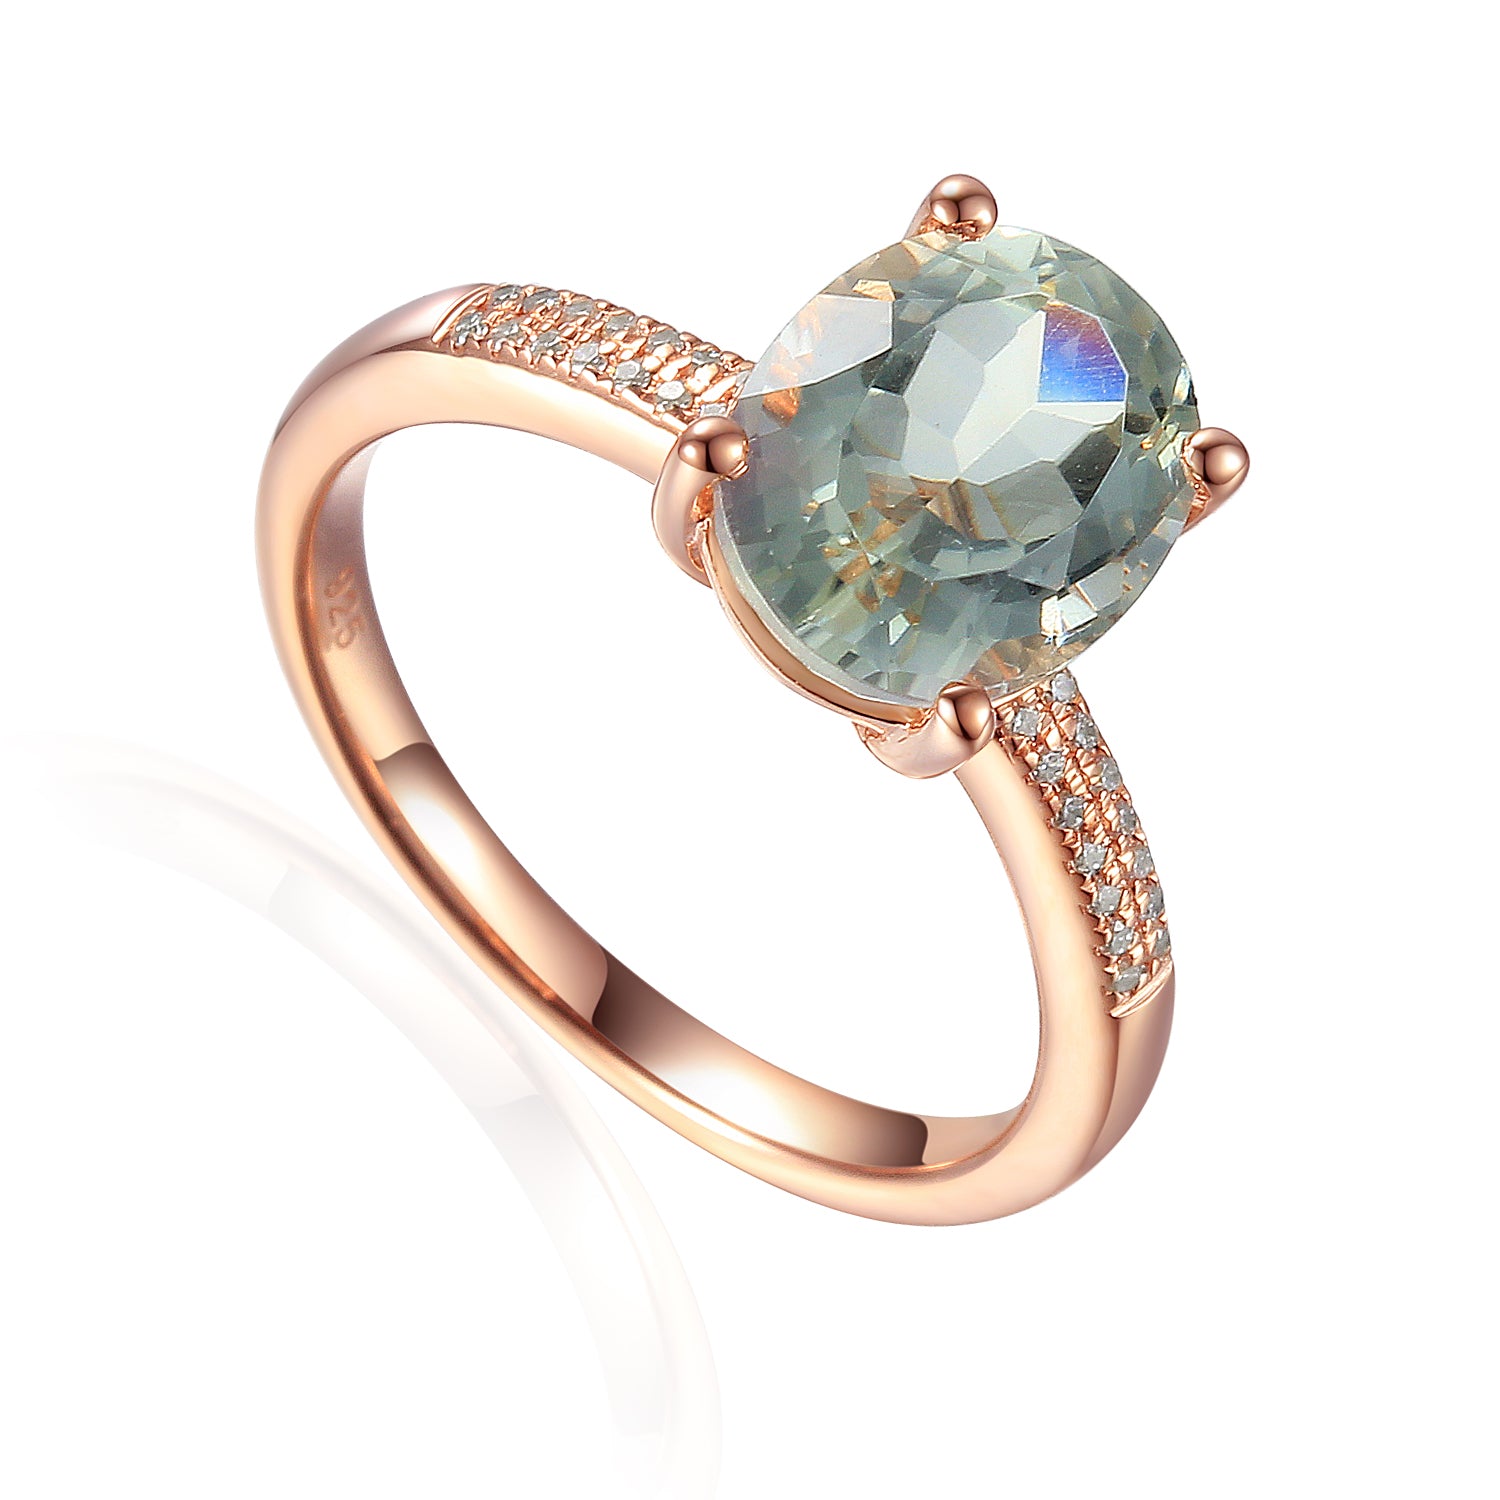 Oval Gemstone Ring with Pave Diamond Shoulders